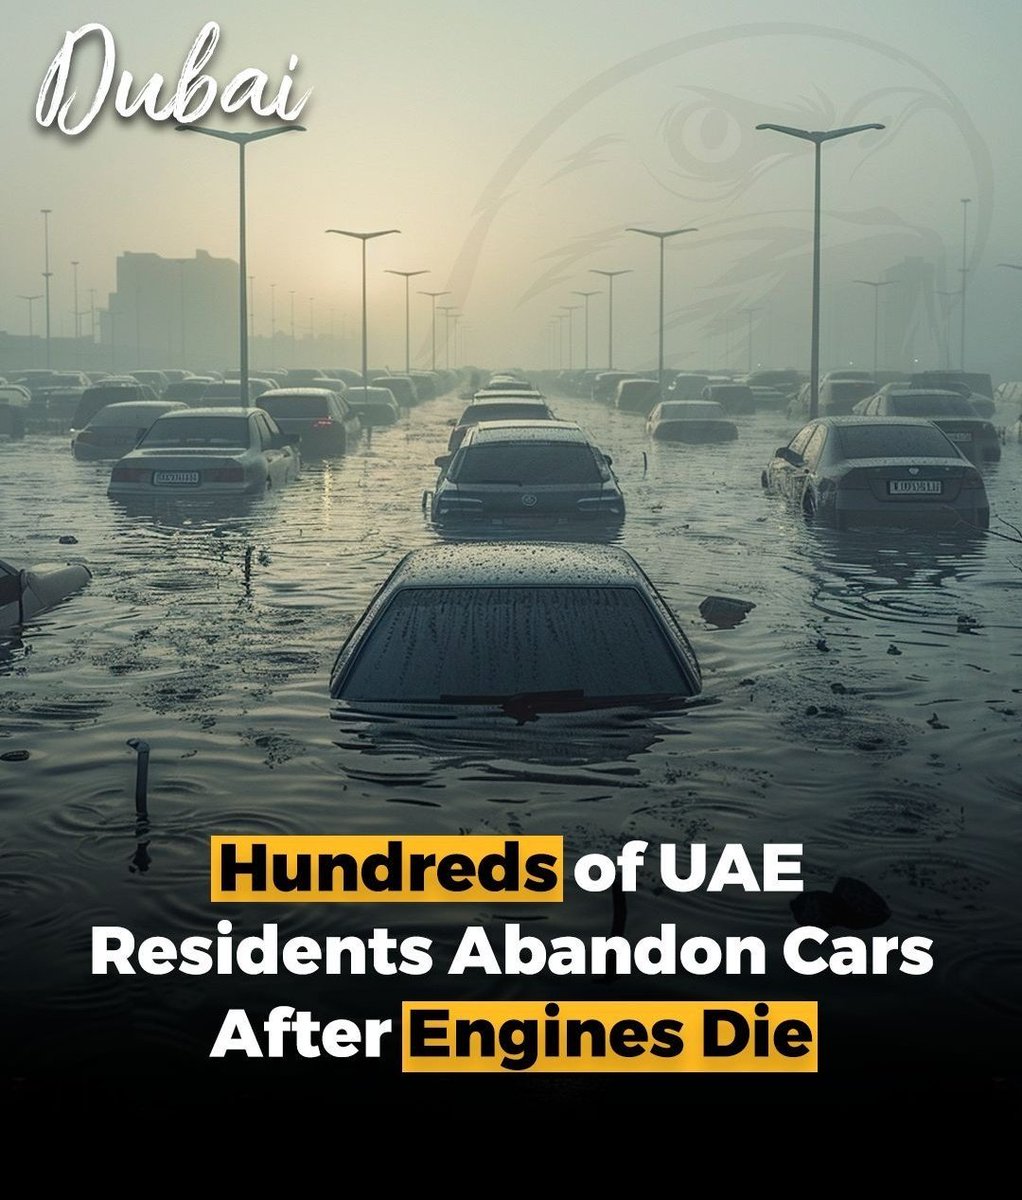 Heavy rains inundated the UAE, forcing many residents to abandon their cars due to flooding, individuals faced a difficult choice between prioritizing their safety or clinging to their vehicles. #DubaiFlooding #dubairain